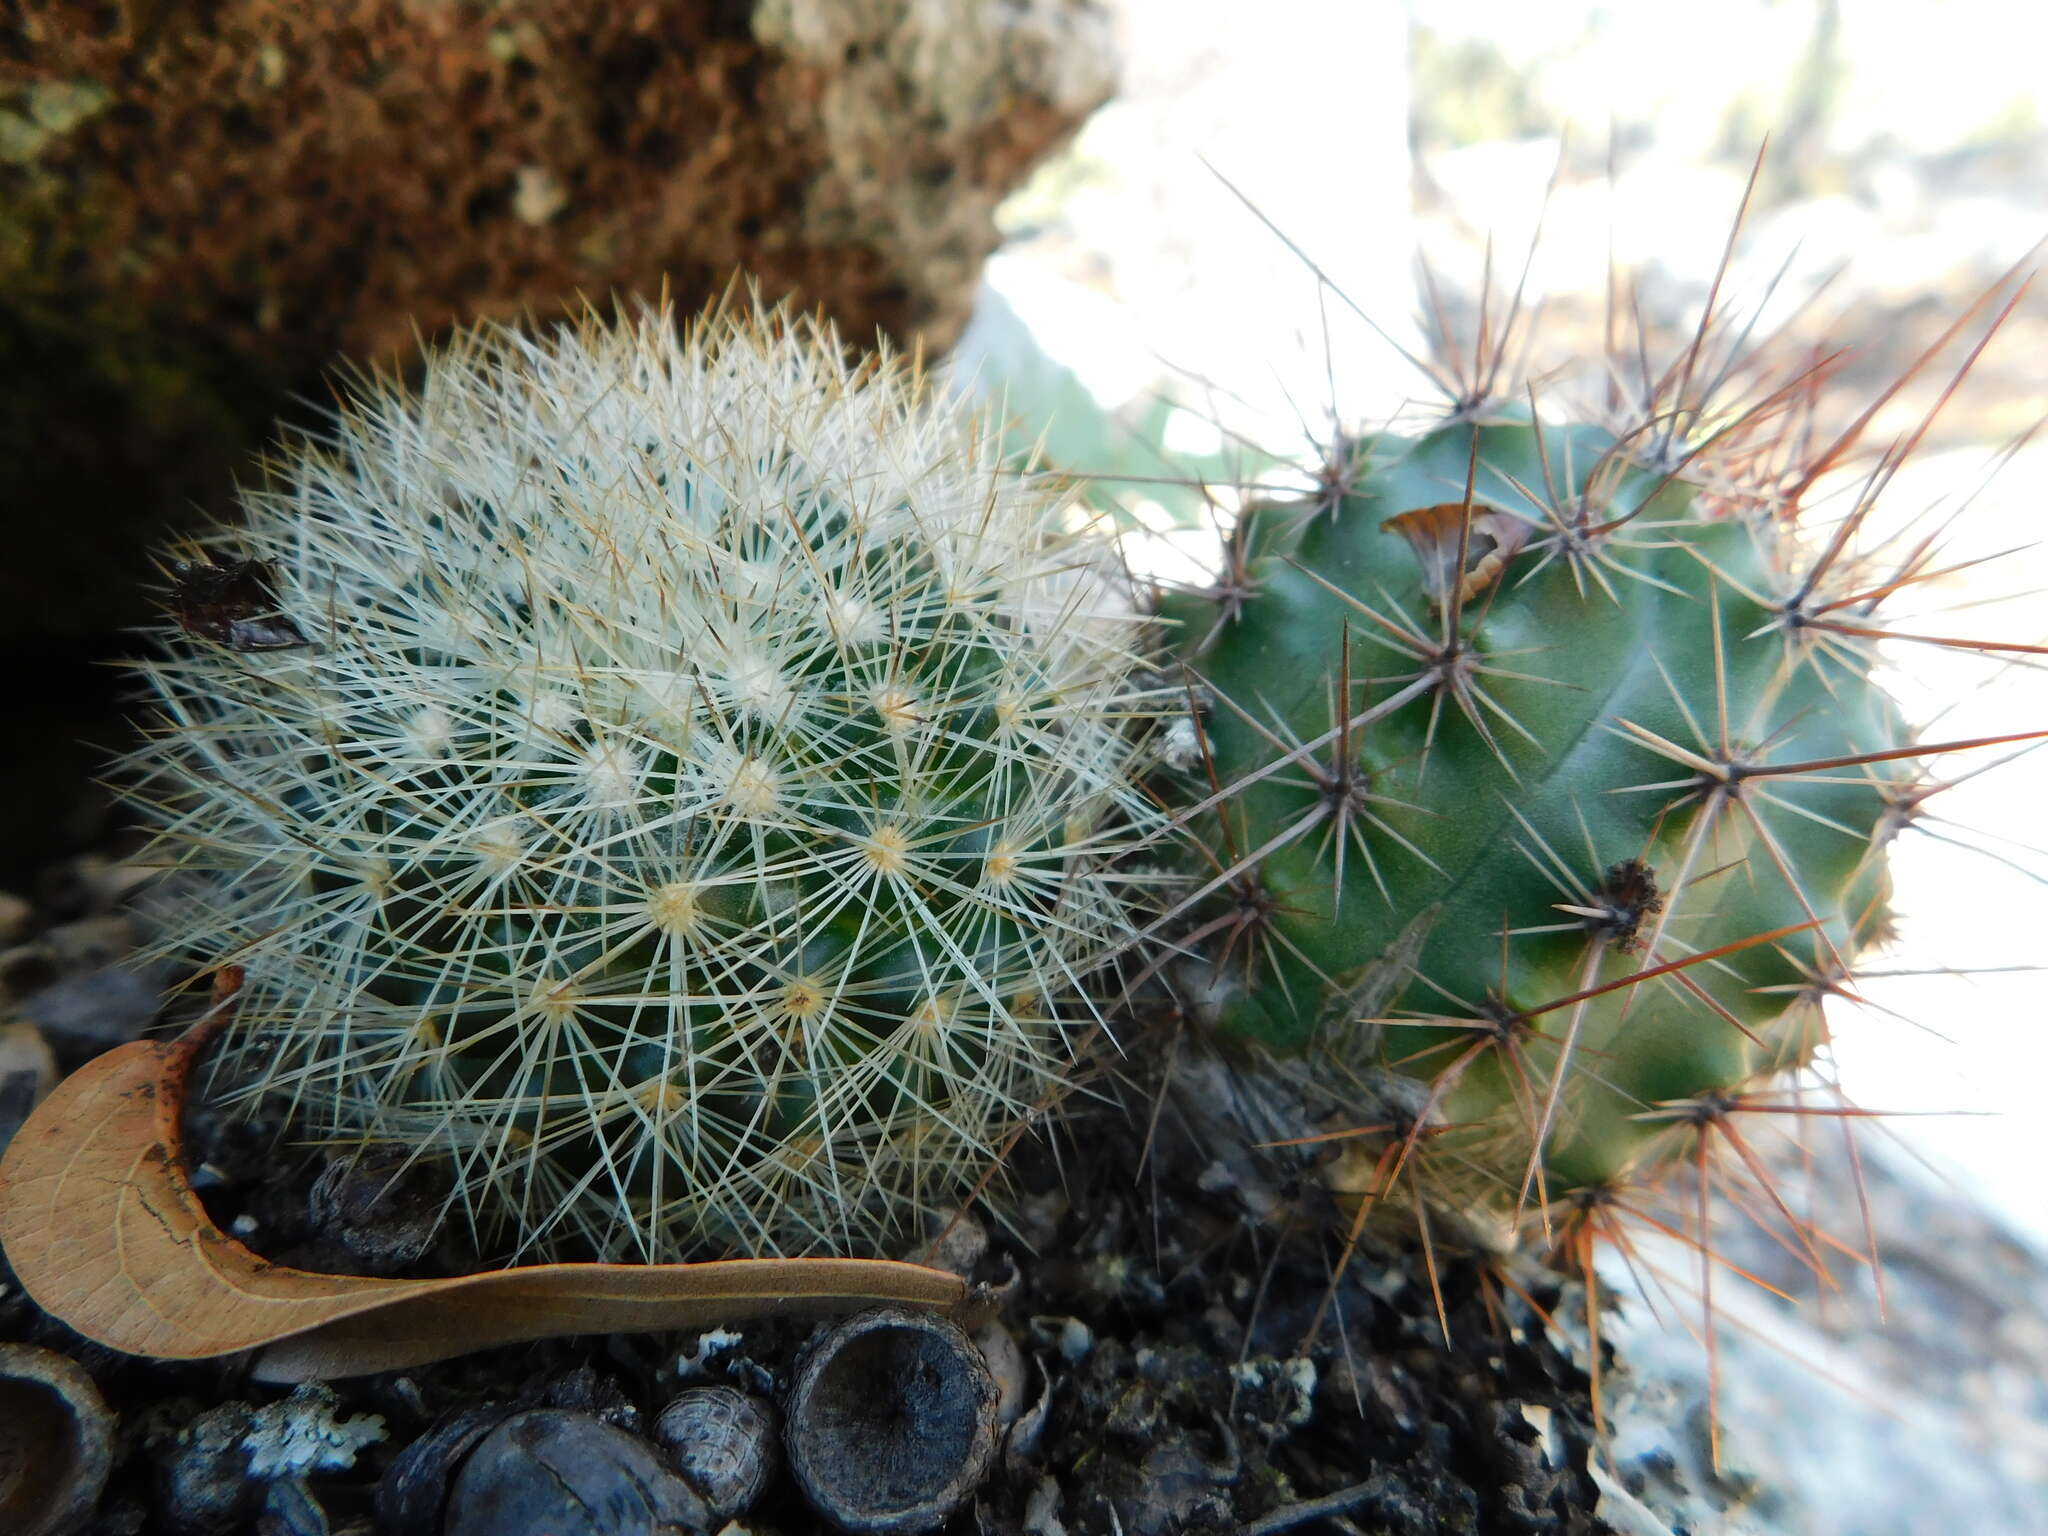 Image of Mammillaria densispina (J. M. Coult.) Orcutt